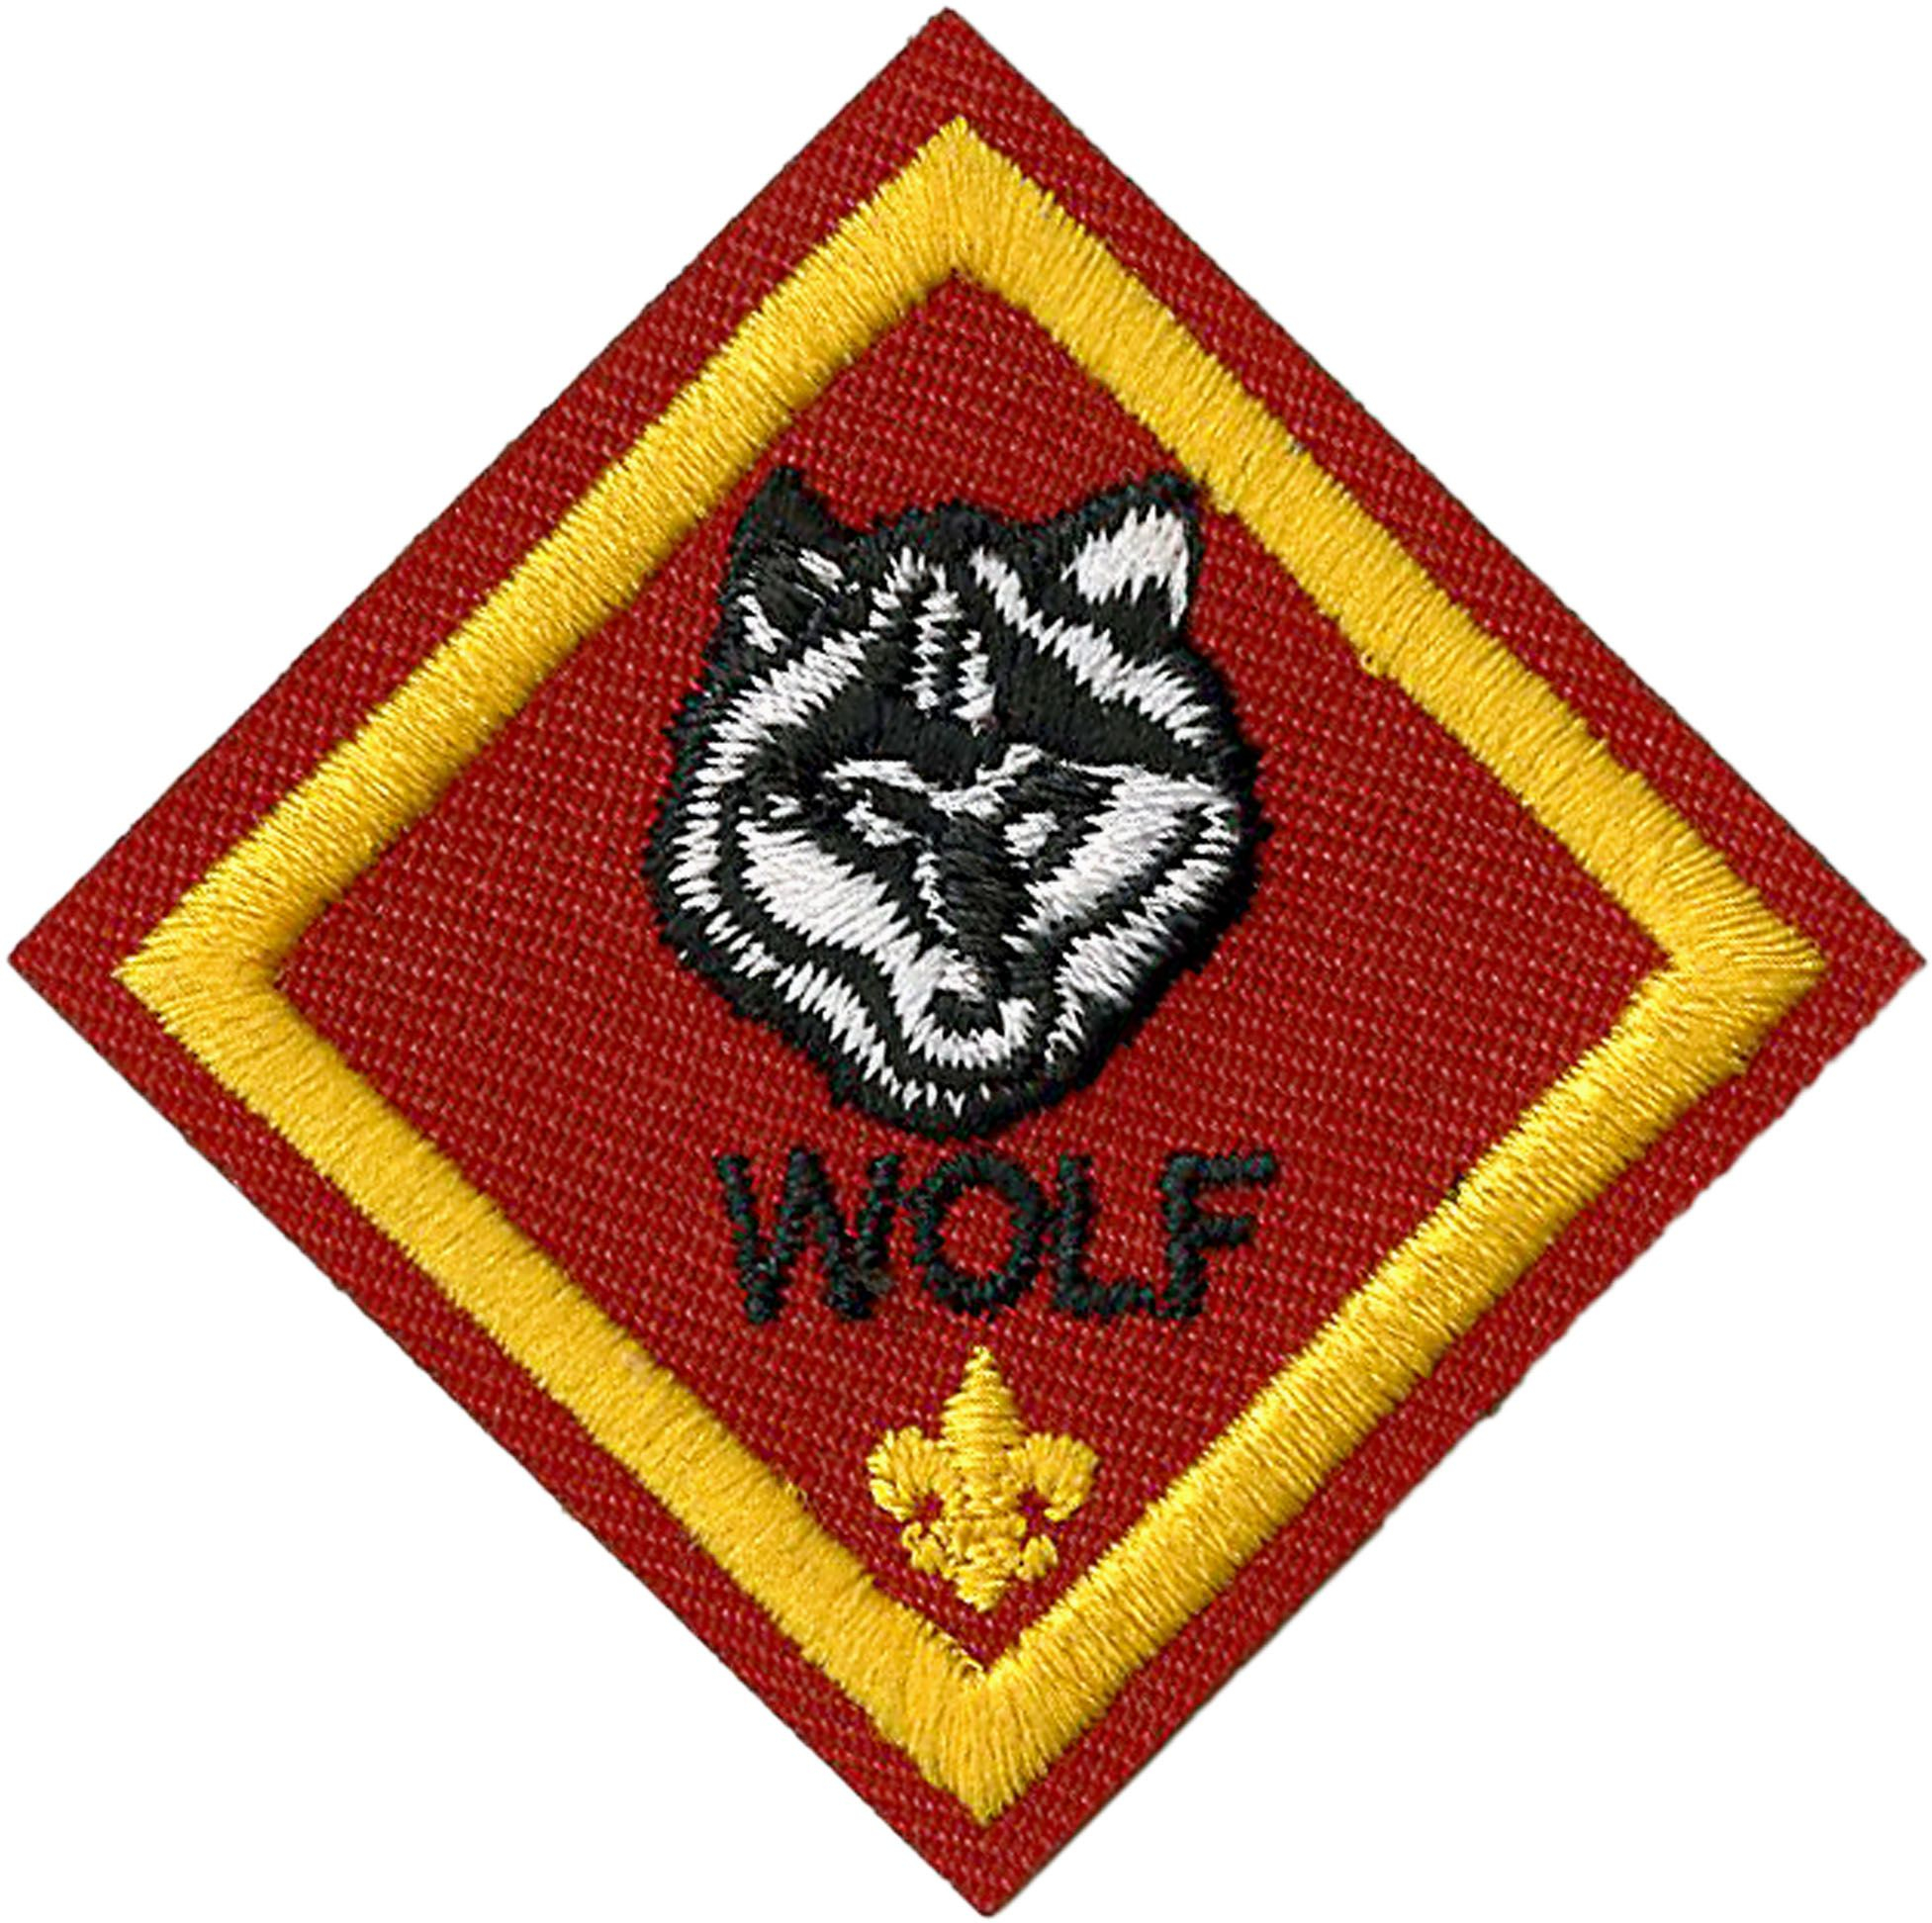 CUB SCOUTS OF AMERICA WOLF EMBLEM METAL KEY RING OFFICIAL LICENSED BSA BRAND NEW